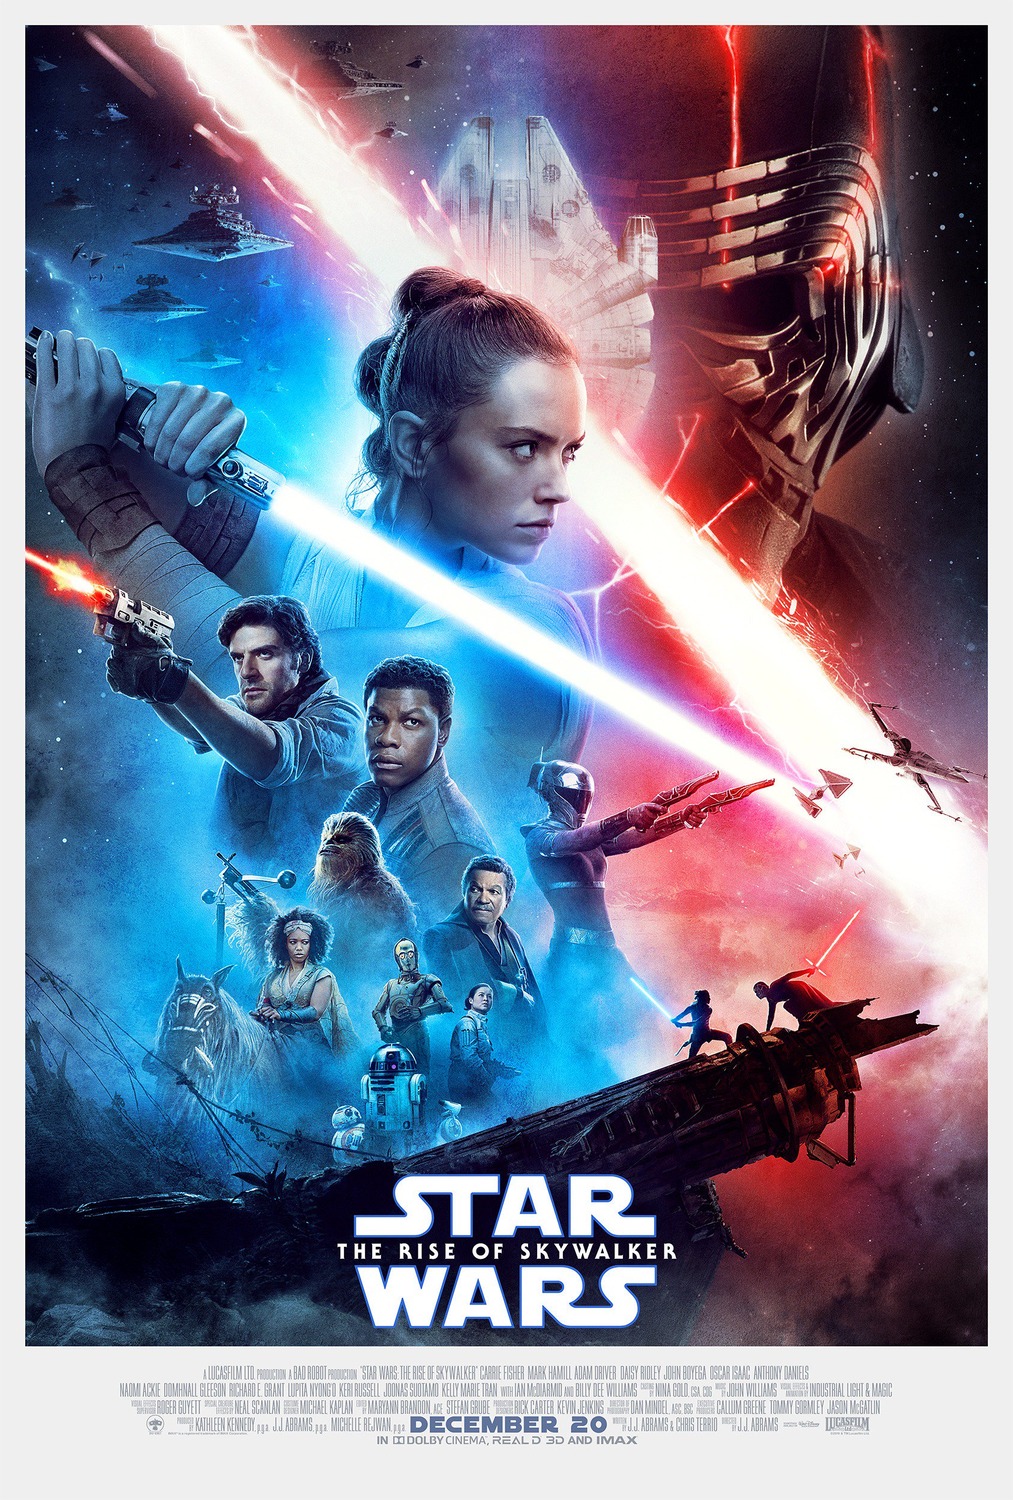 Star Wars Episode IX – The Rise Of Skywalker review: It ends here